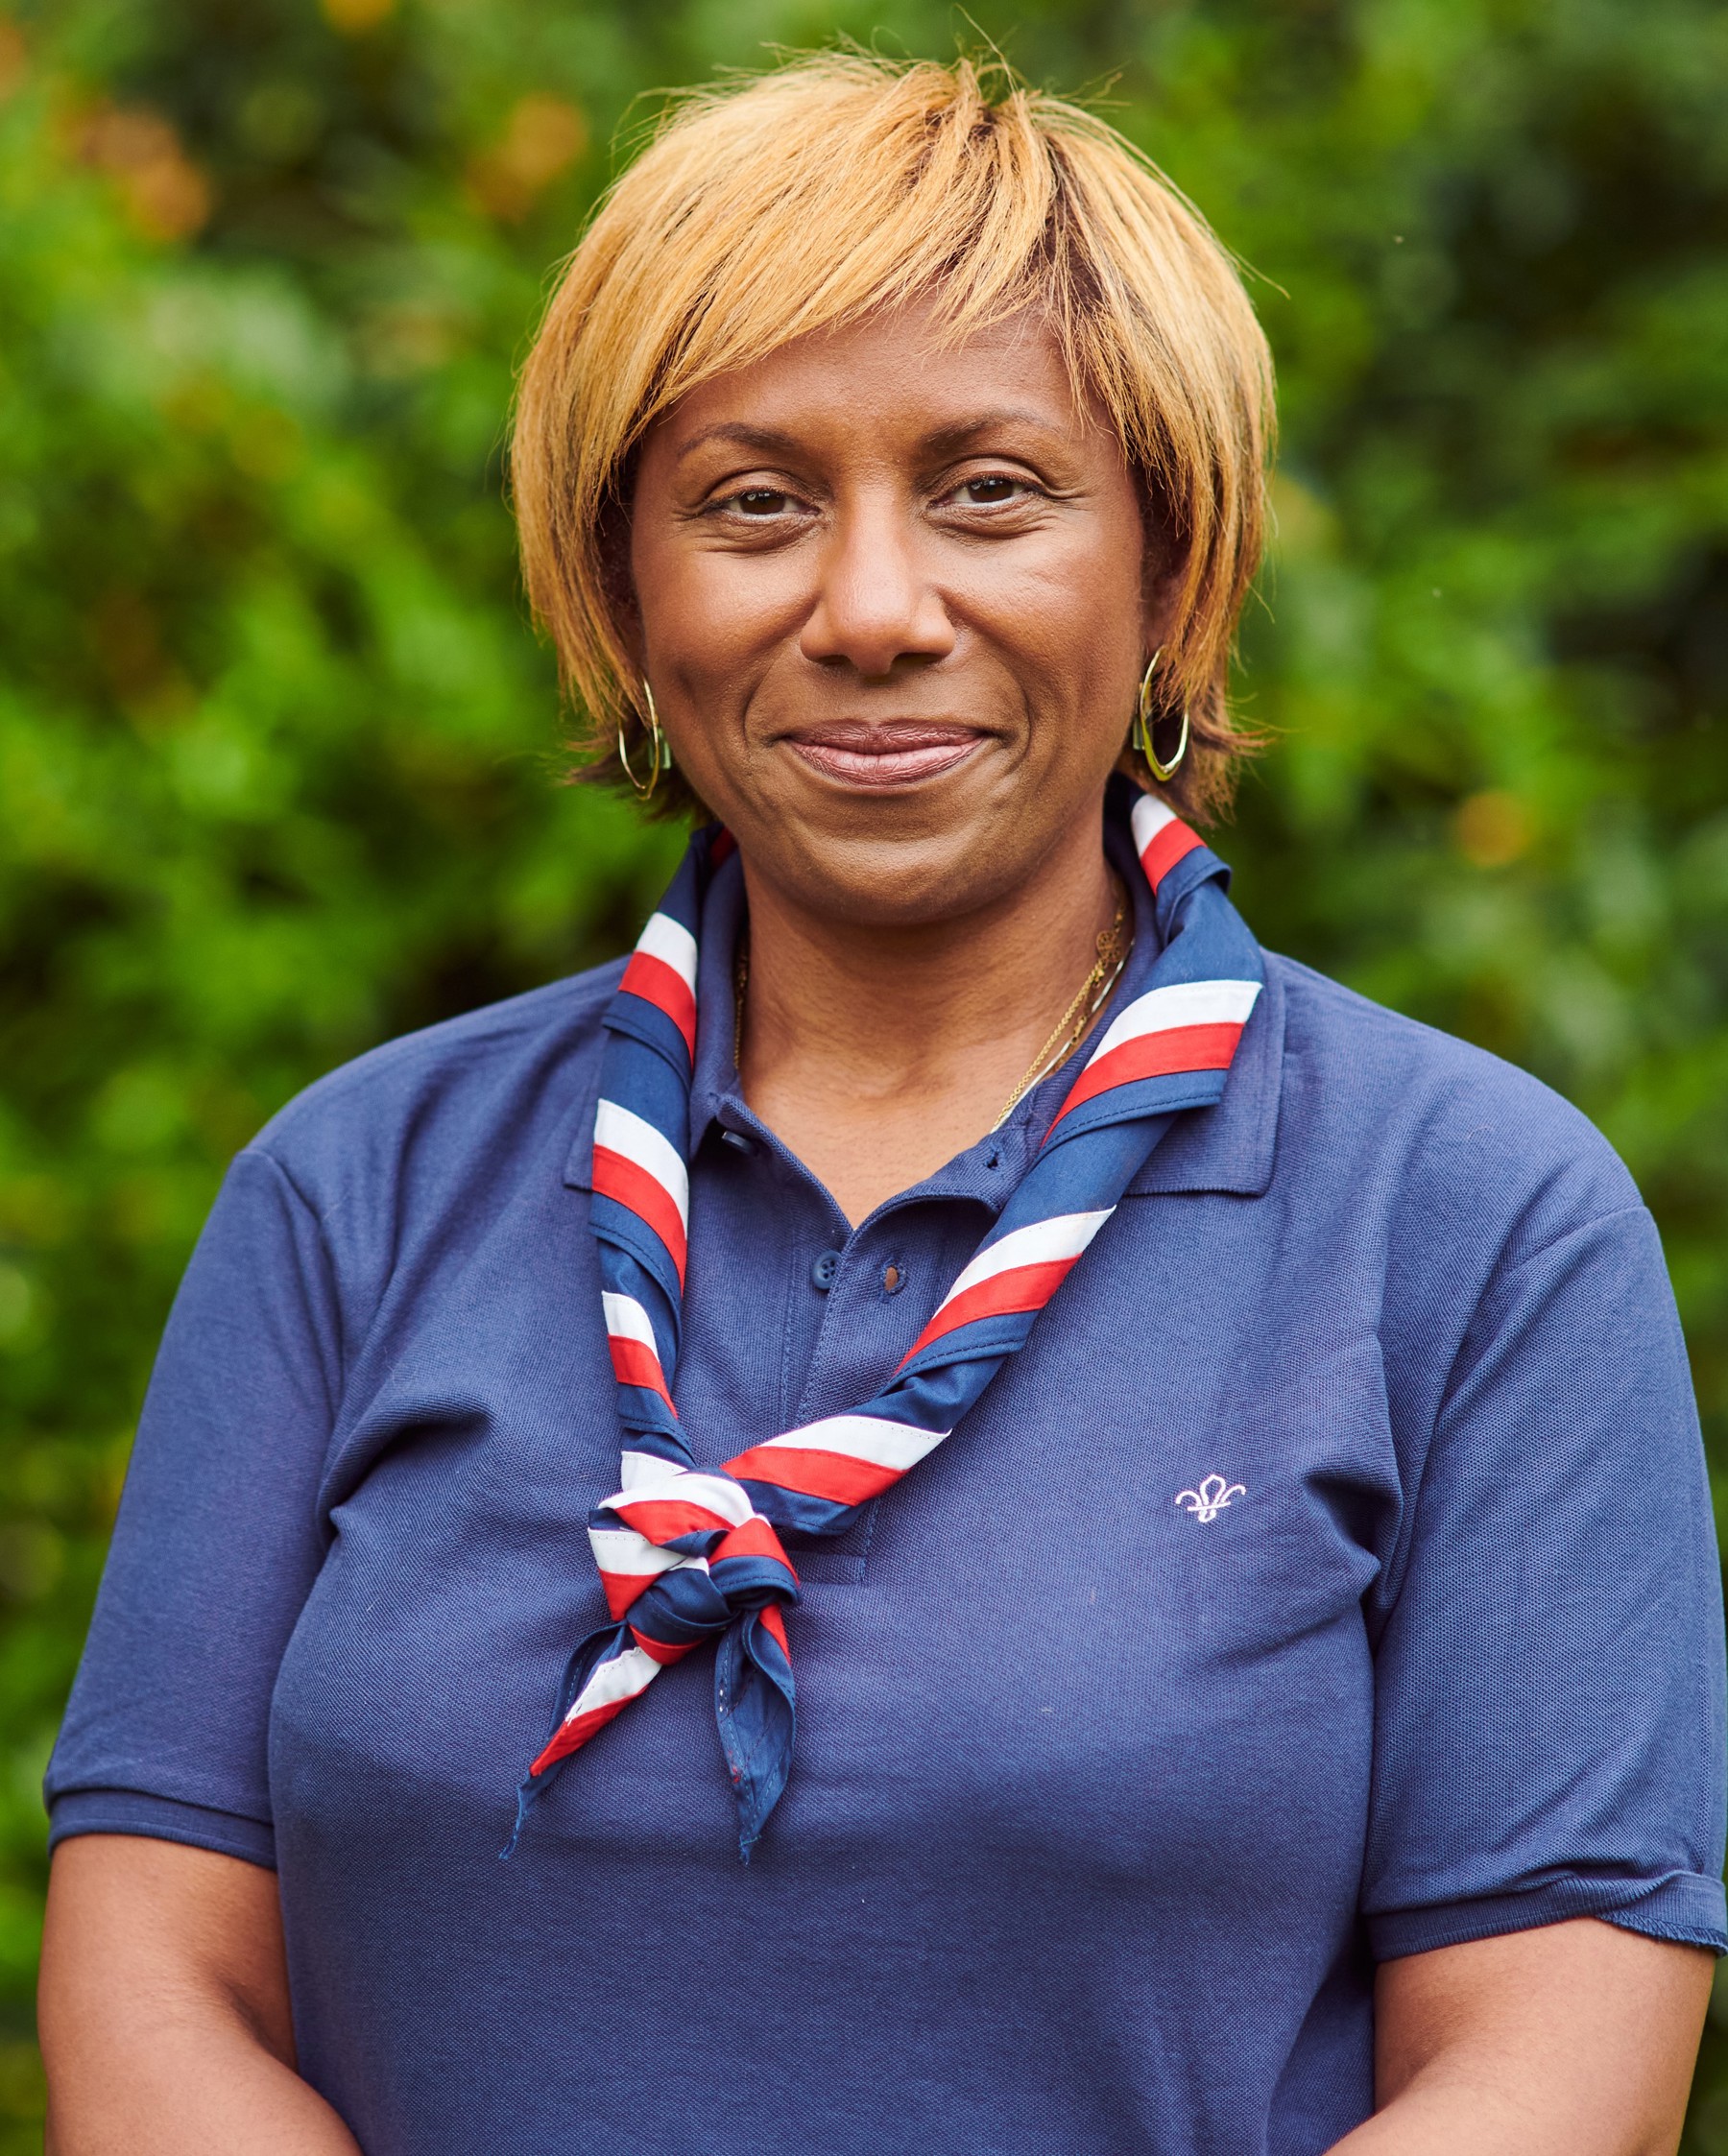 Our Board of Trustee member Sharon smiles at the camera wearing a navy polo shirt with the Scout logo and a necker